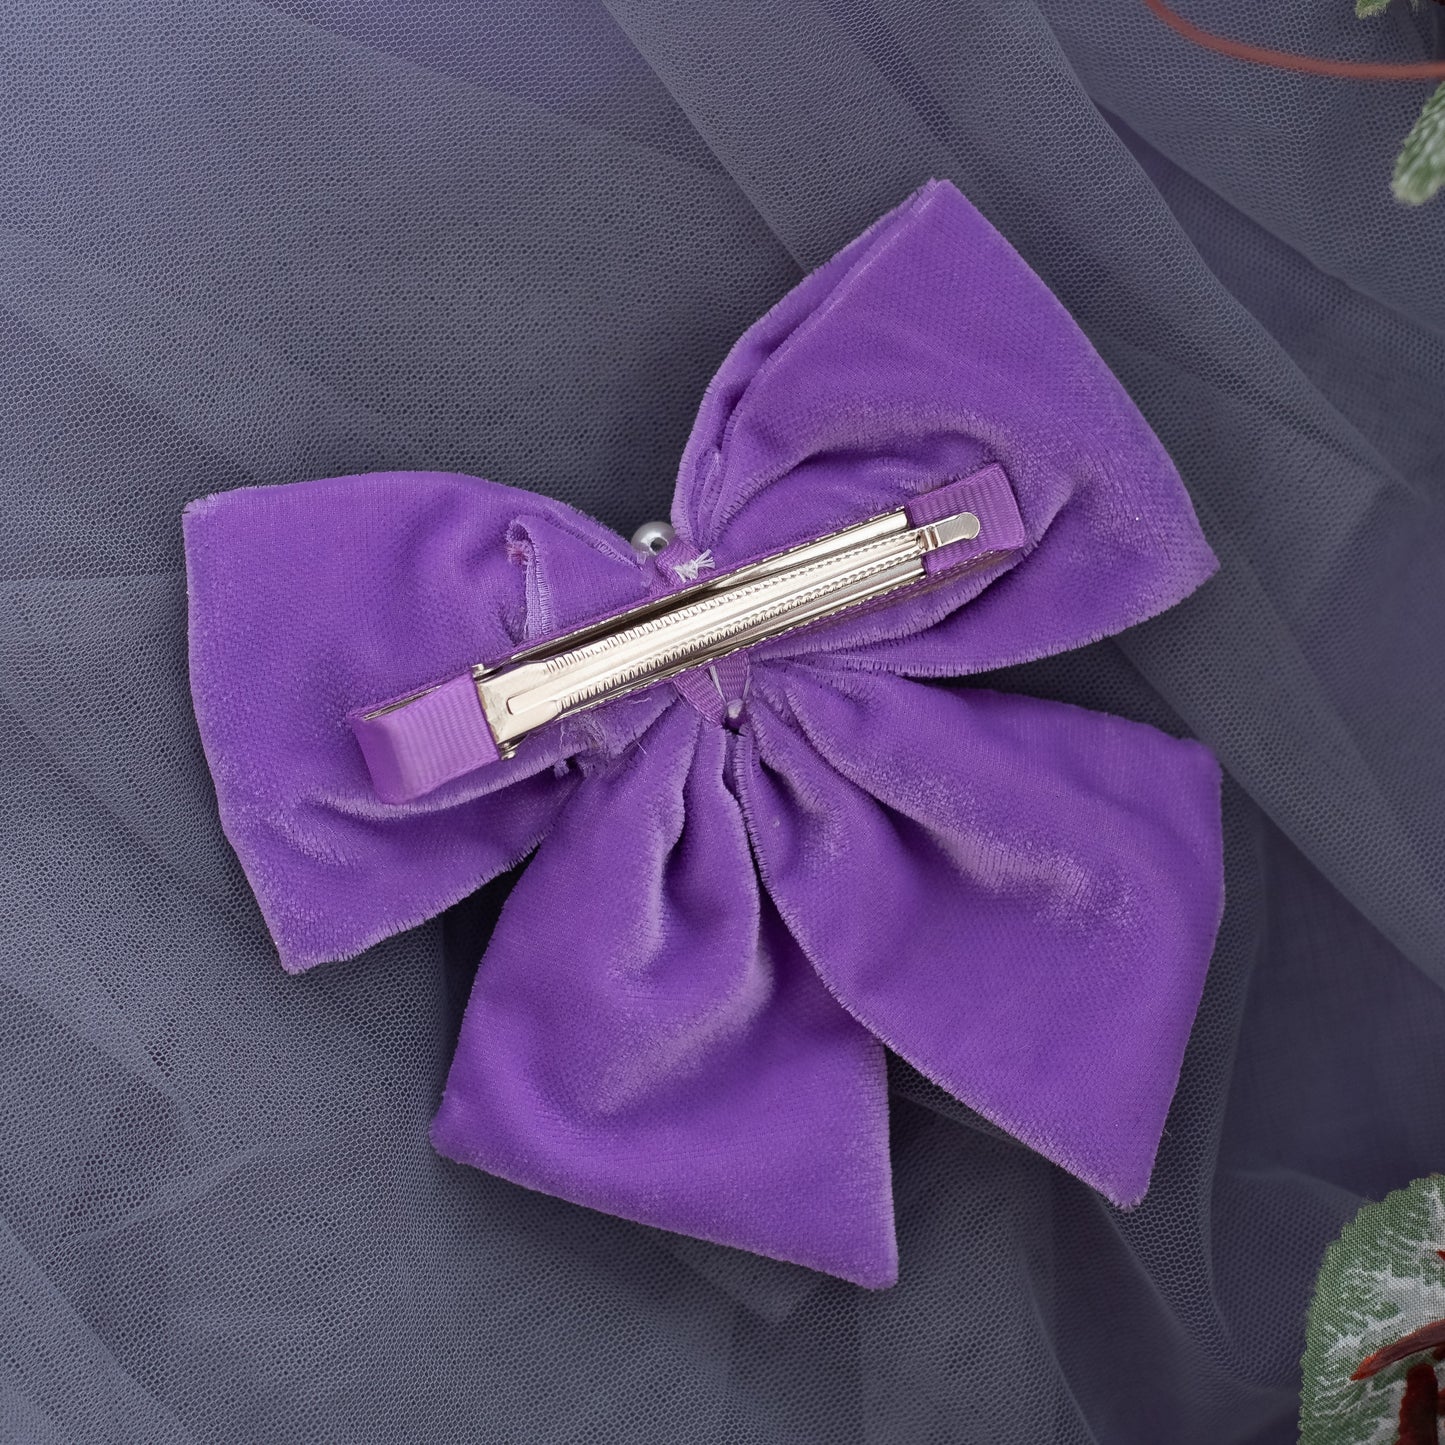 Velvet party bow on Alligator clip  embellished with pearls  - Purple (1 Single bow = 1 quantity)